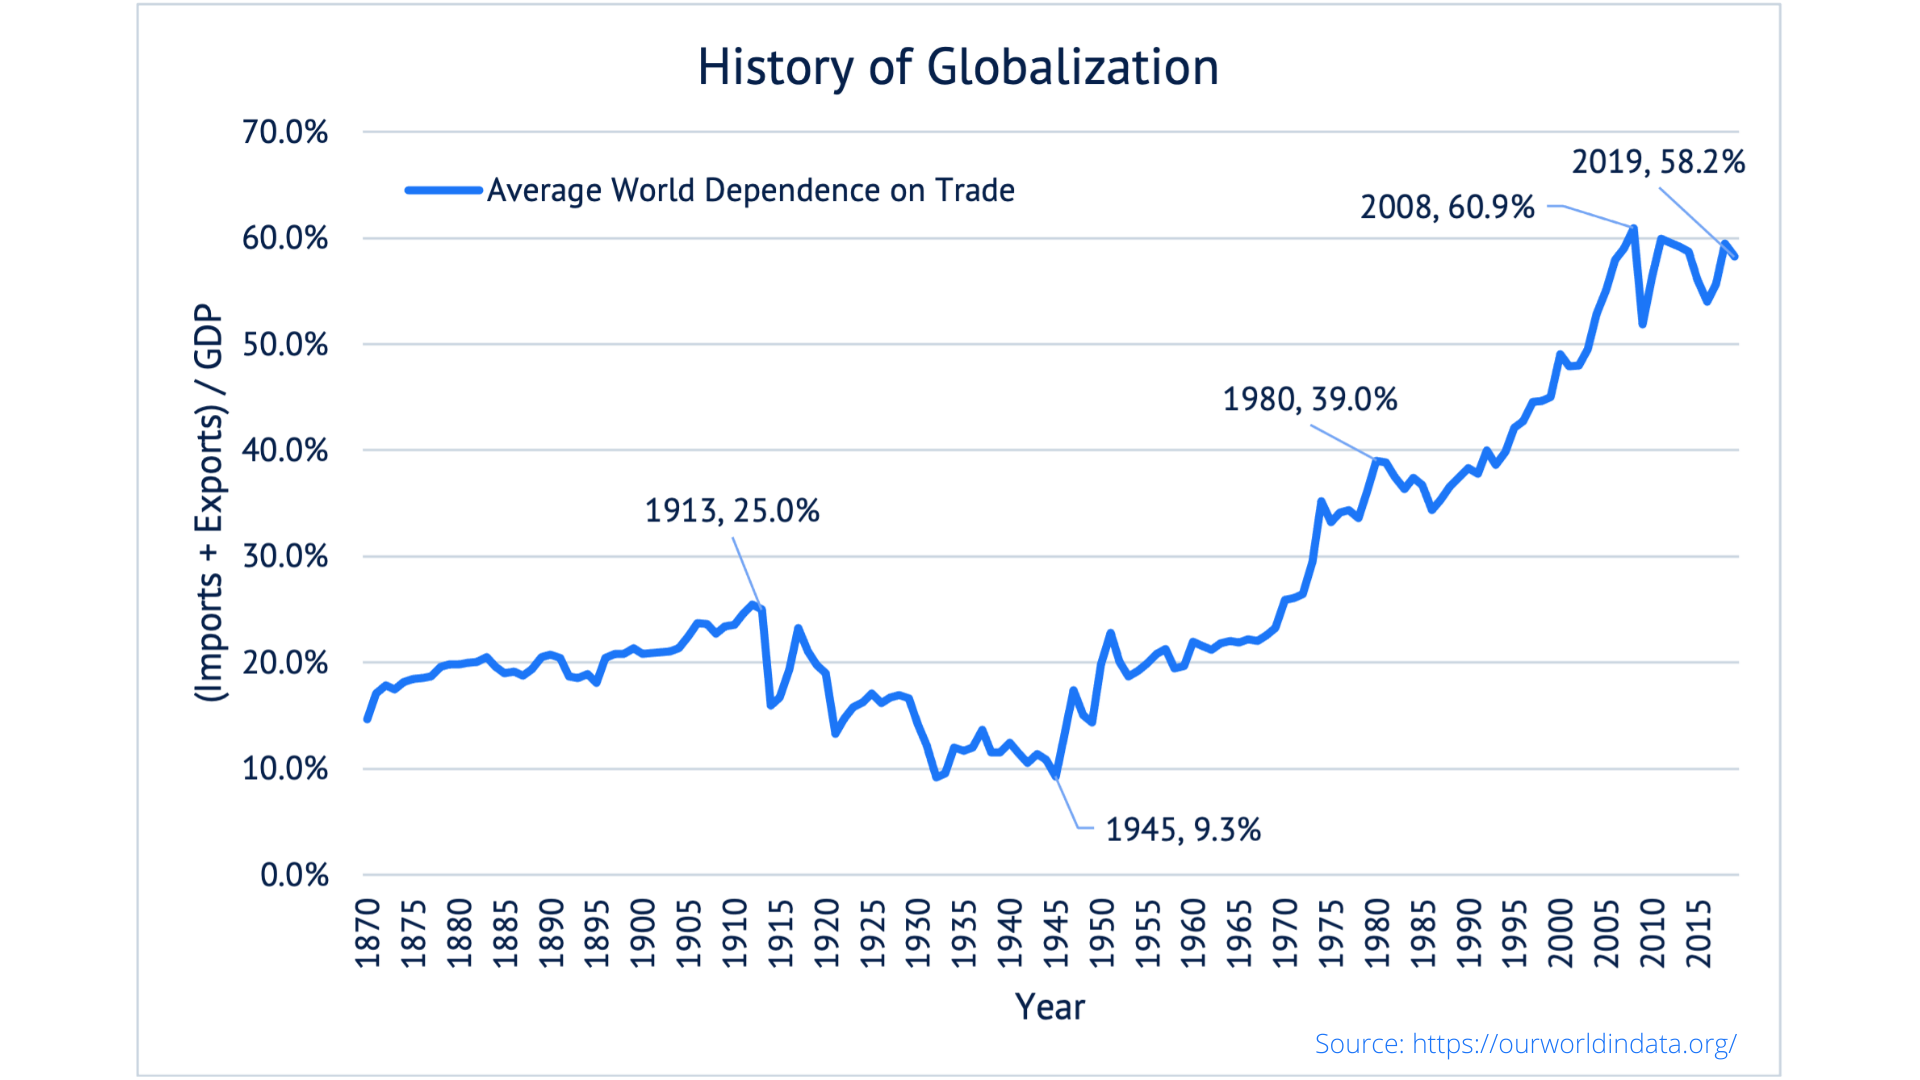 History of Globalization to explain deglobalization trends